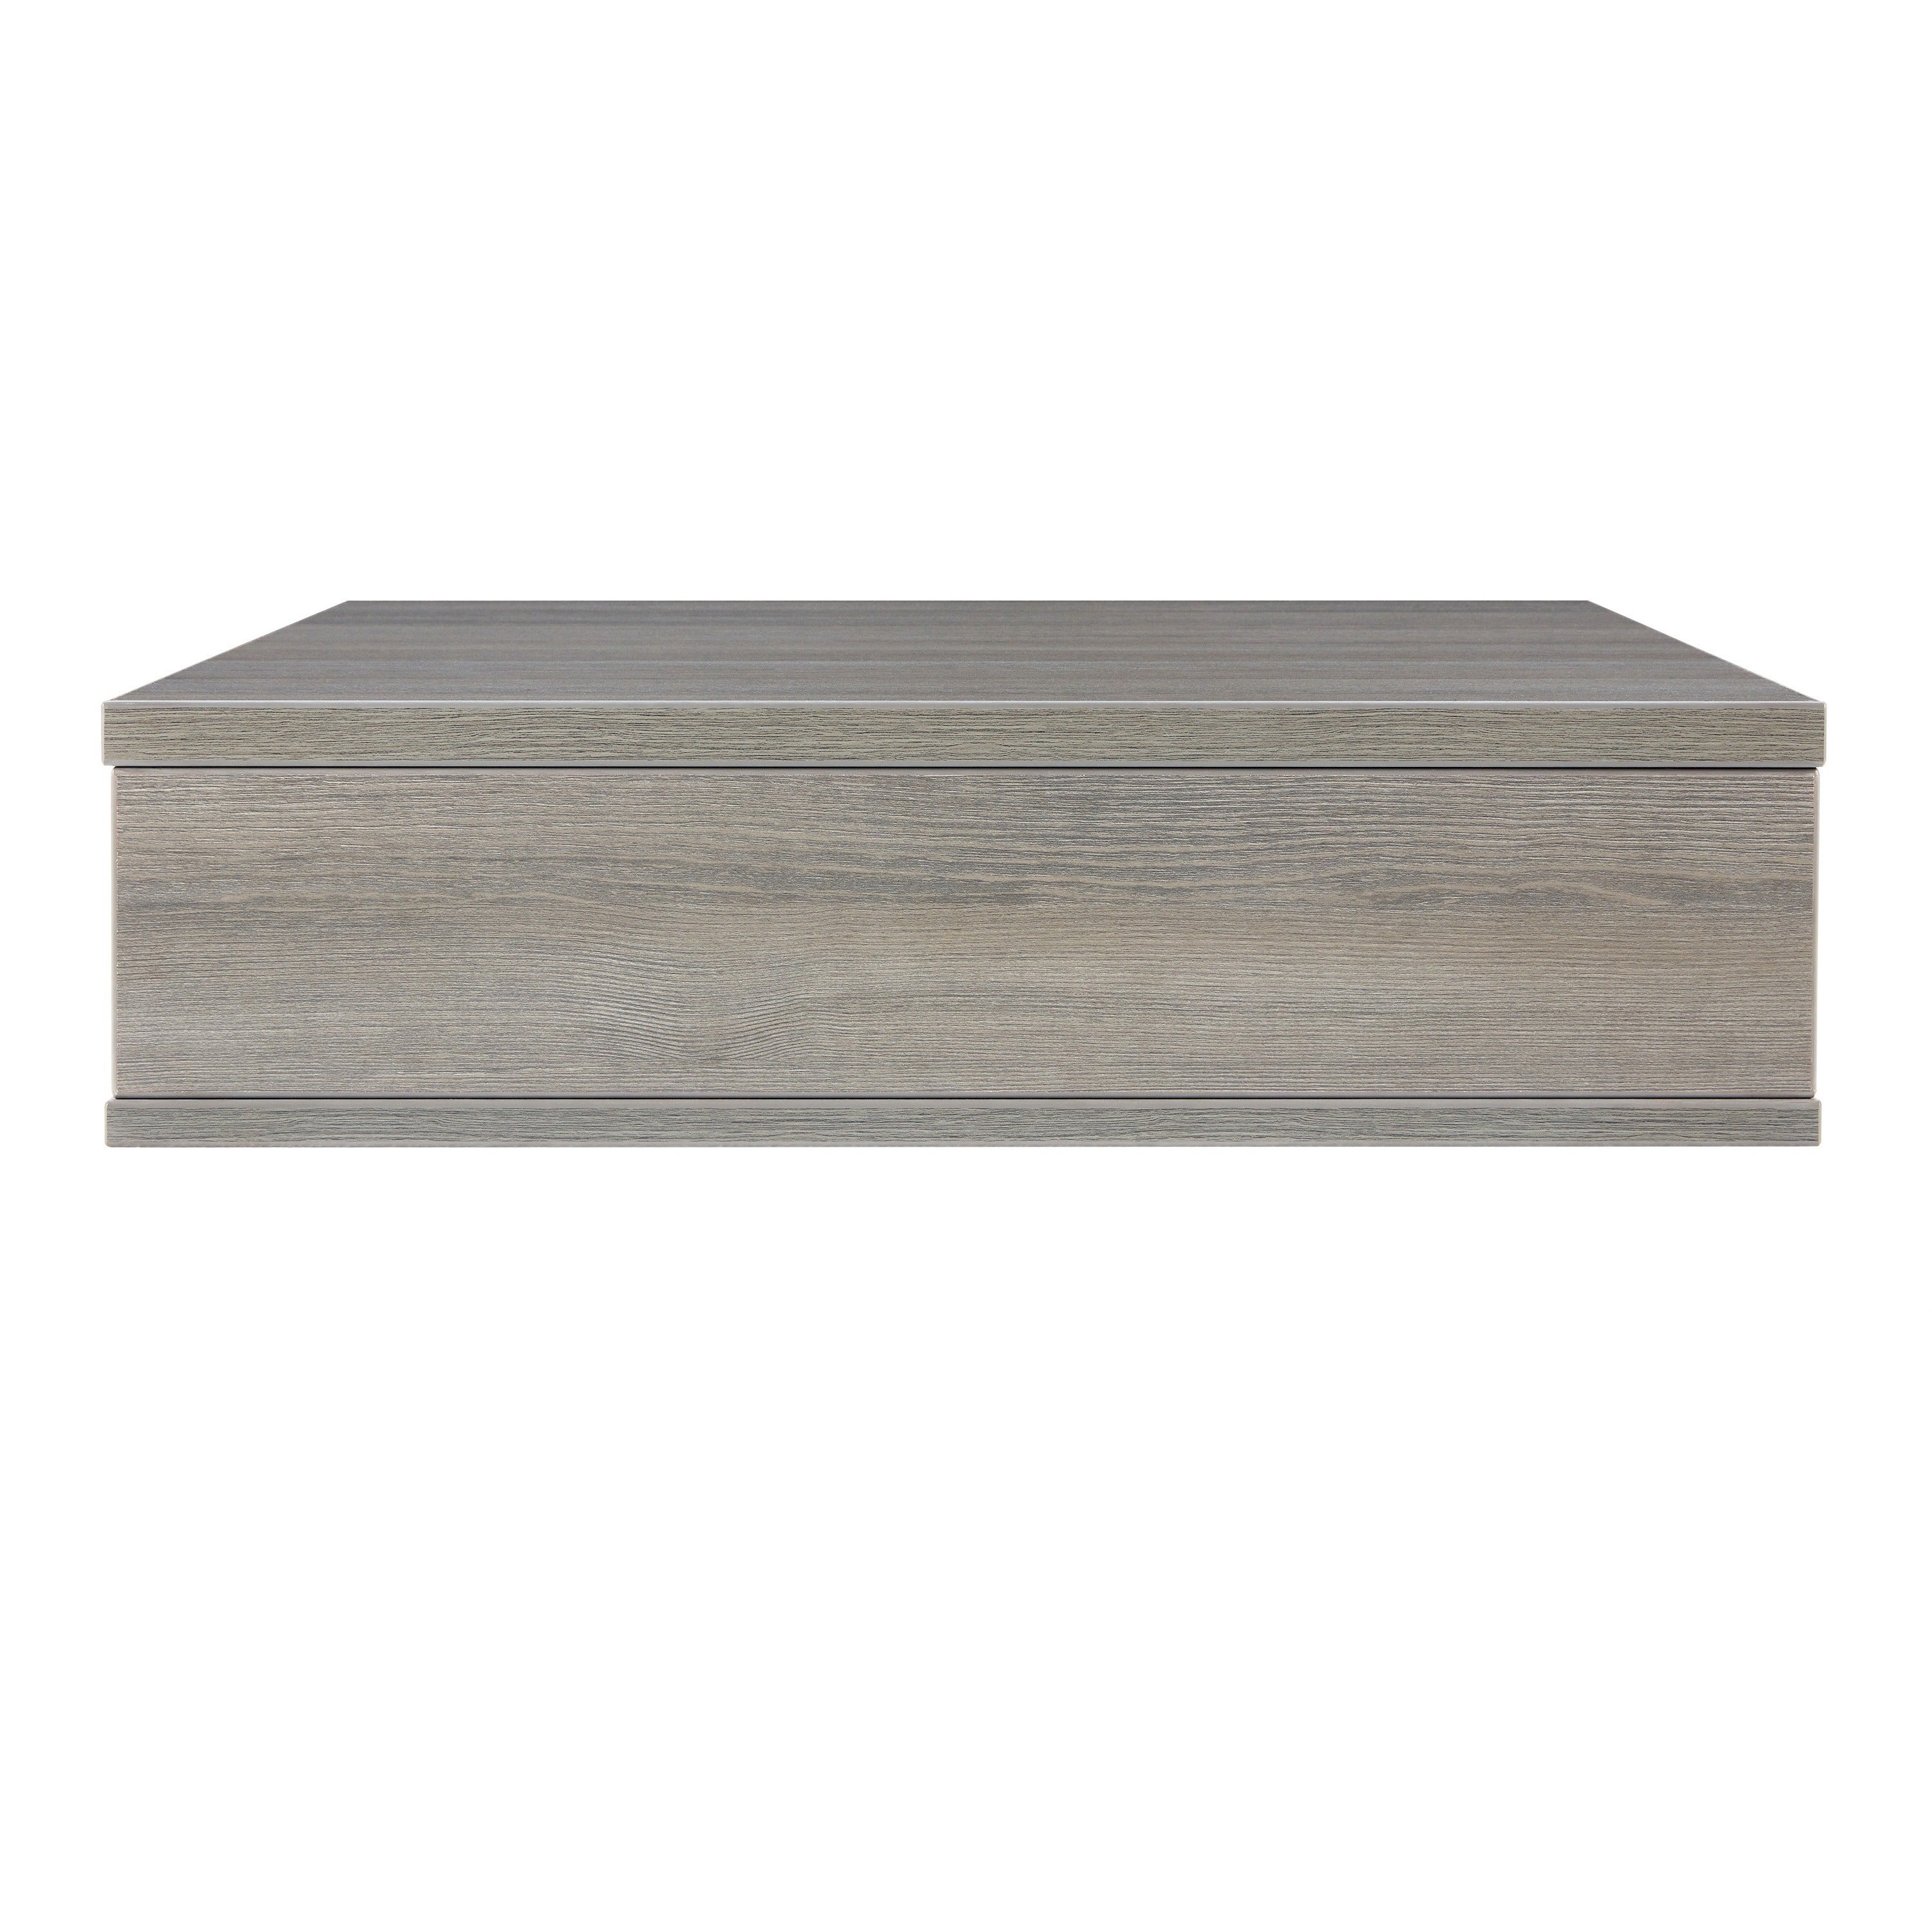 lorell-contemporary-reception-collection-sectional-tabletop-253-x-25566-finish-weathered-charcoal-laminate_llr86935 - 2